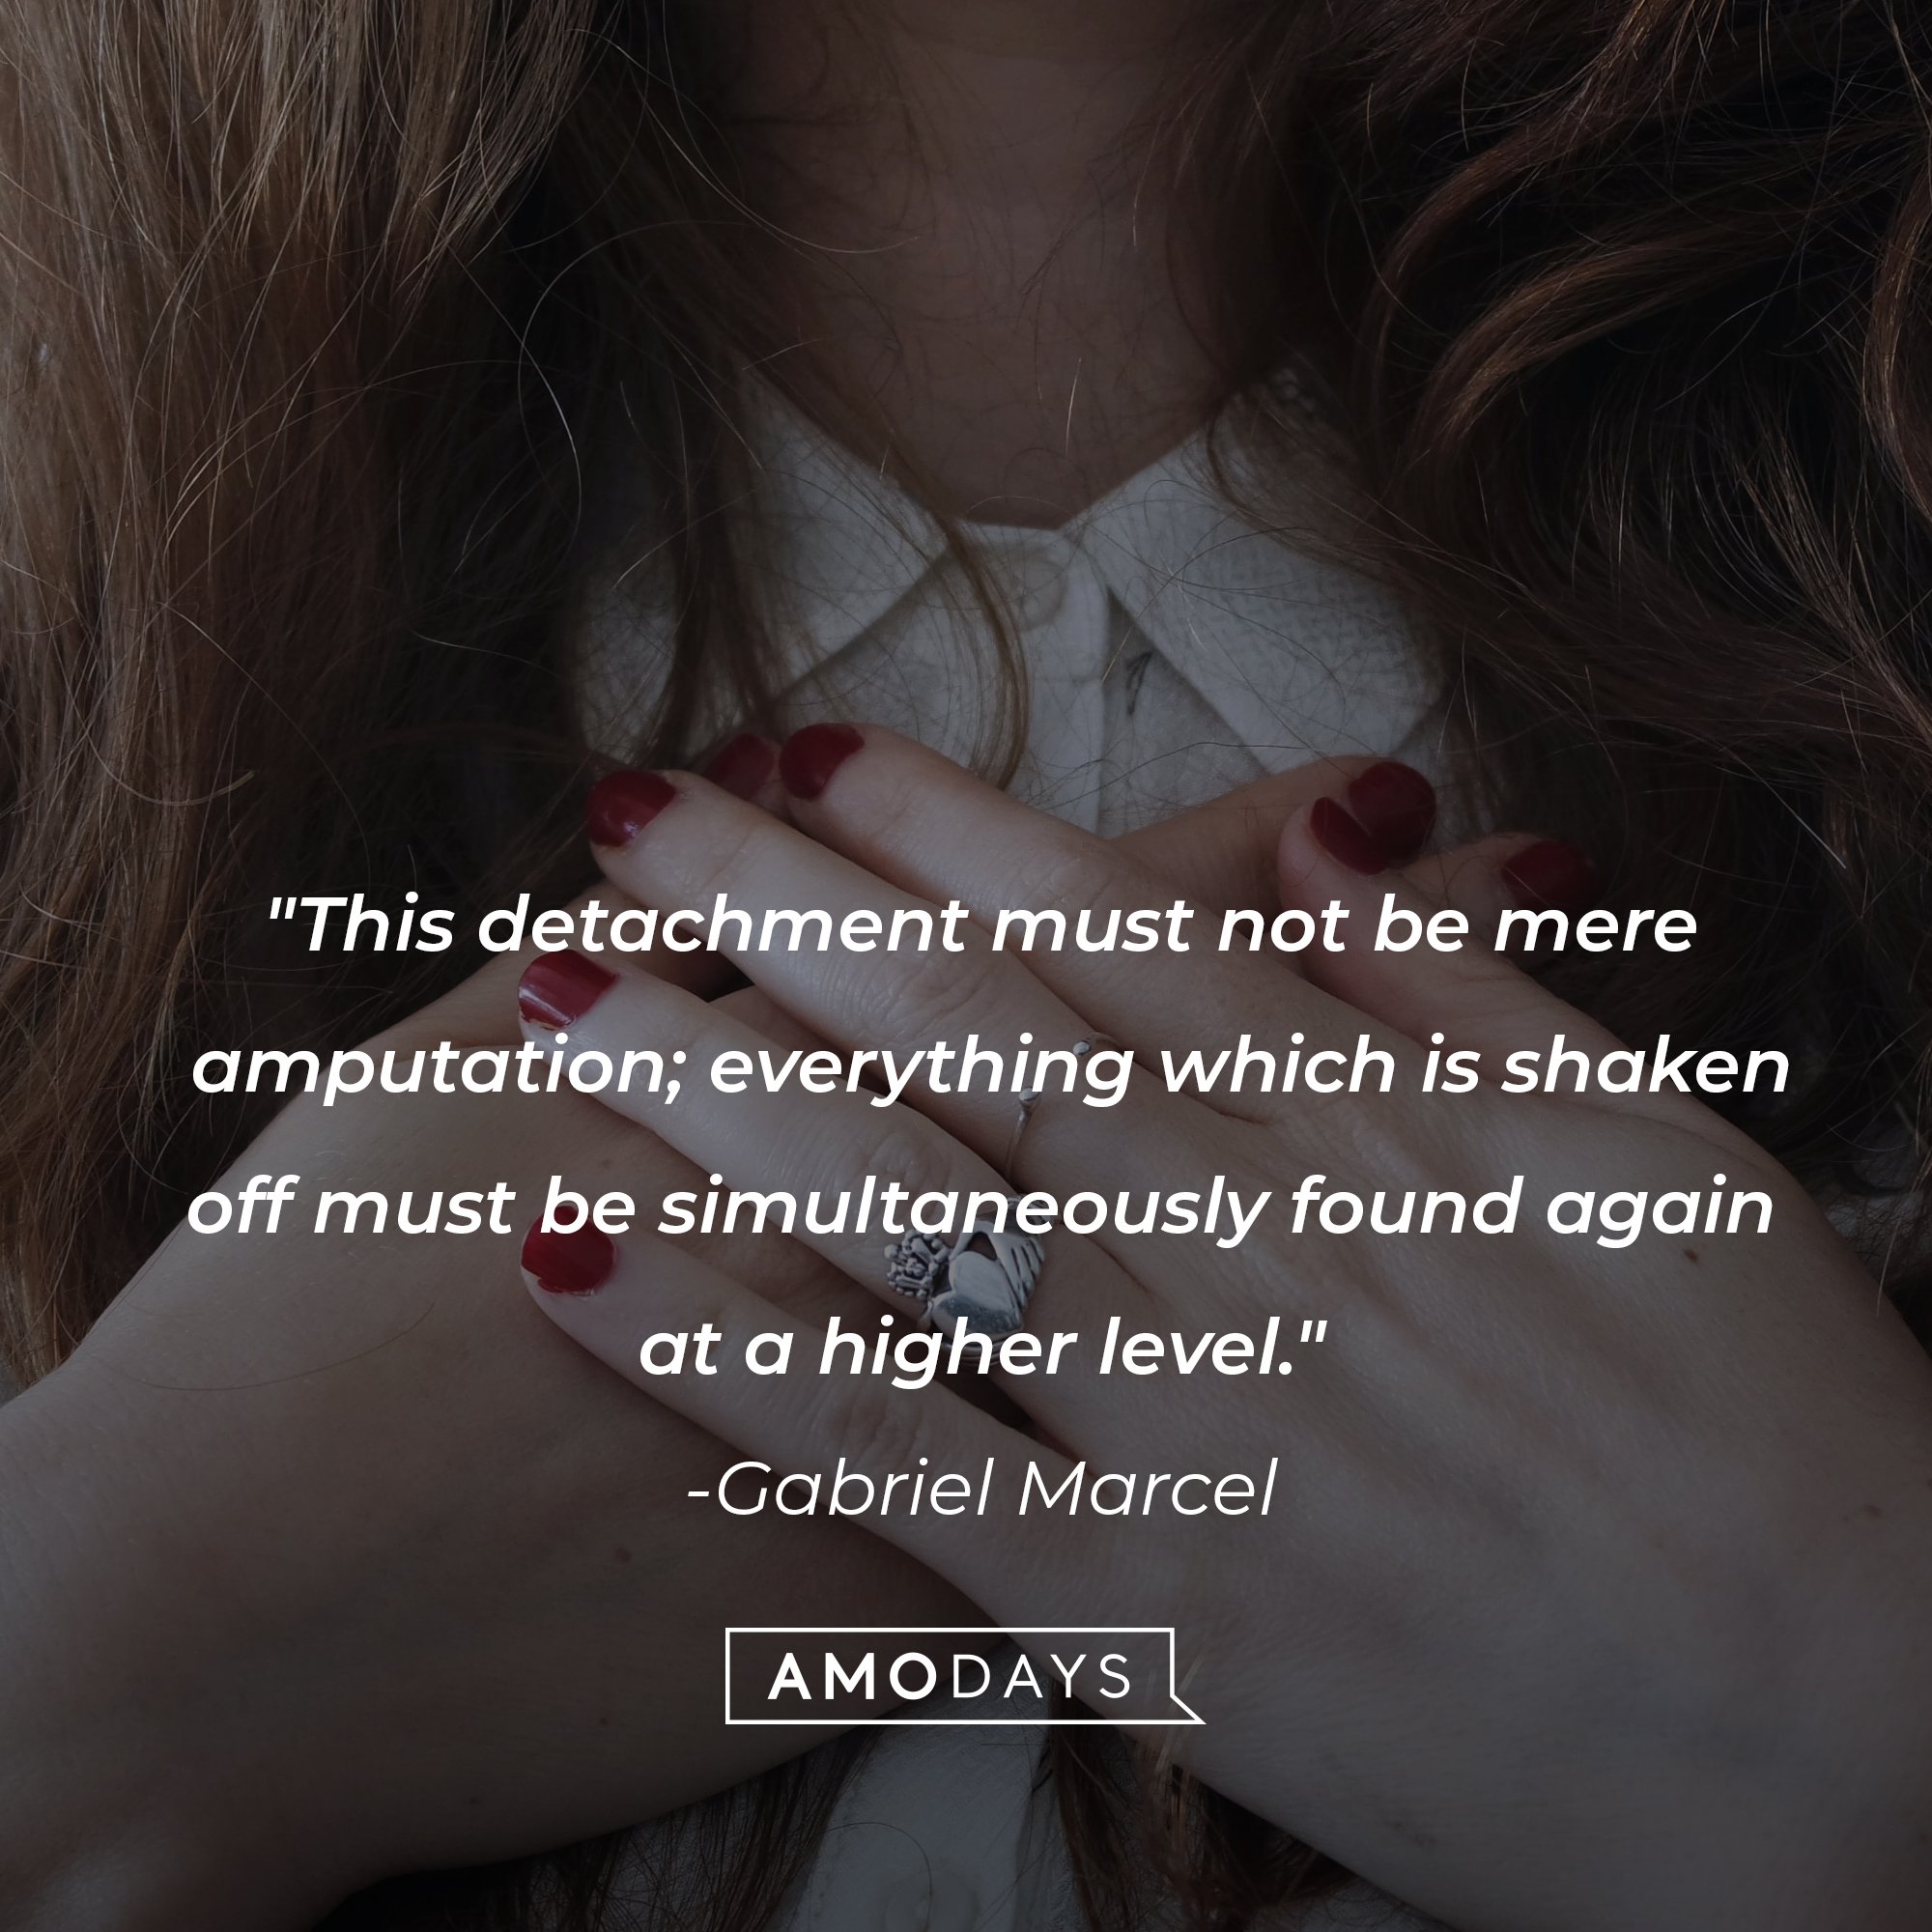 Gabriel Marcel's quote: "This detachment must not be mere amputation; everything which is shaken off must be simultaneously found again at a higher level." | Image: AmoDays